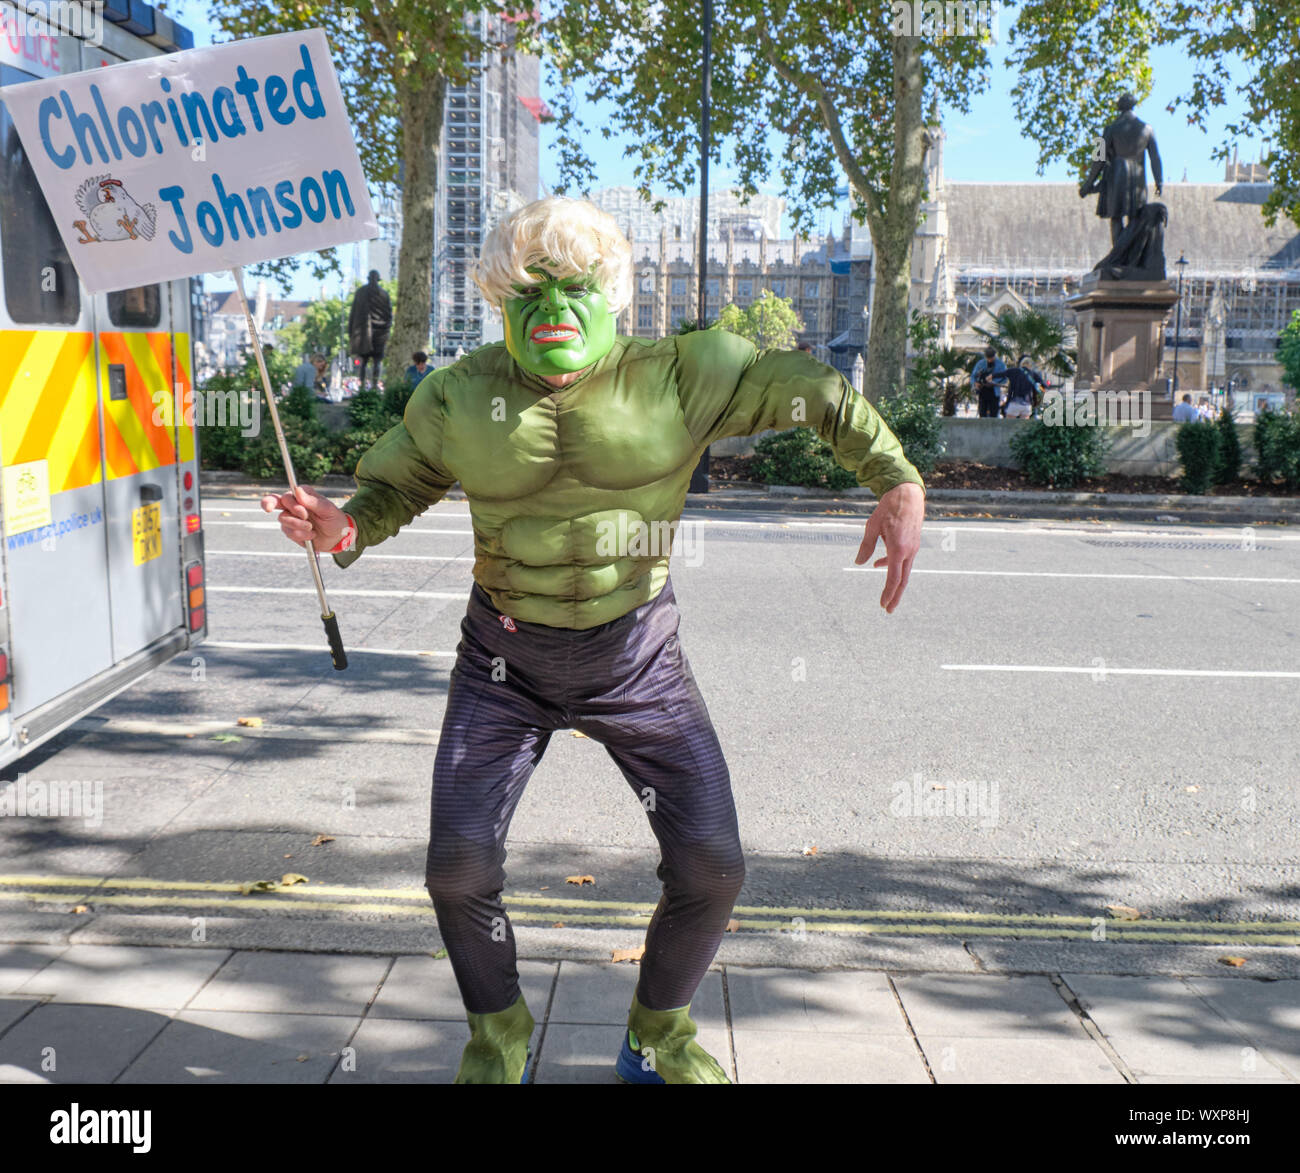 London, UK. 17th September 2019.  Demonstrator holding protest outside the Supreme Court, waiting for the ruling on the Legal challenge to the Prorogation of parliament. Pro defend democracy supporter in Hulk costume and Johnson wig holding silence protest, with sign  'Chlorinated Johnson' waiting for answer to challenge of legality of shut down  in wake of Brexit deadline . Credit: JF Pelletier/Alamy Live News. Stock Photo